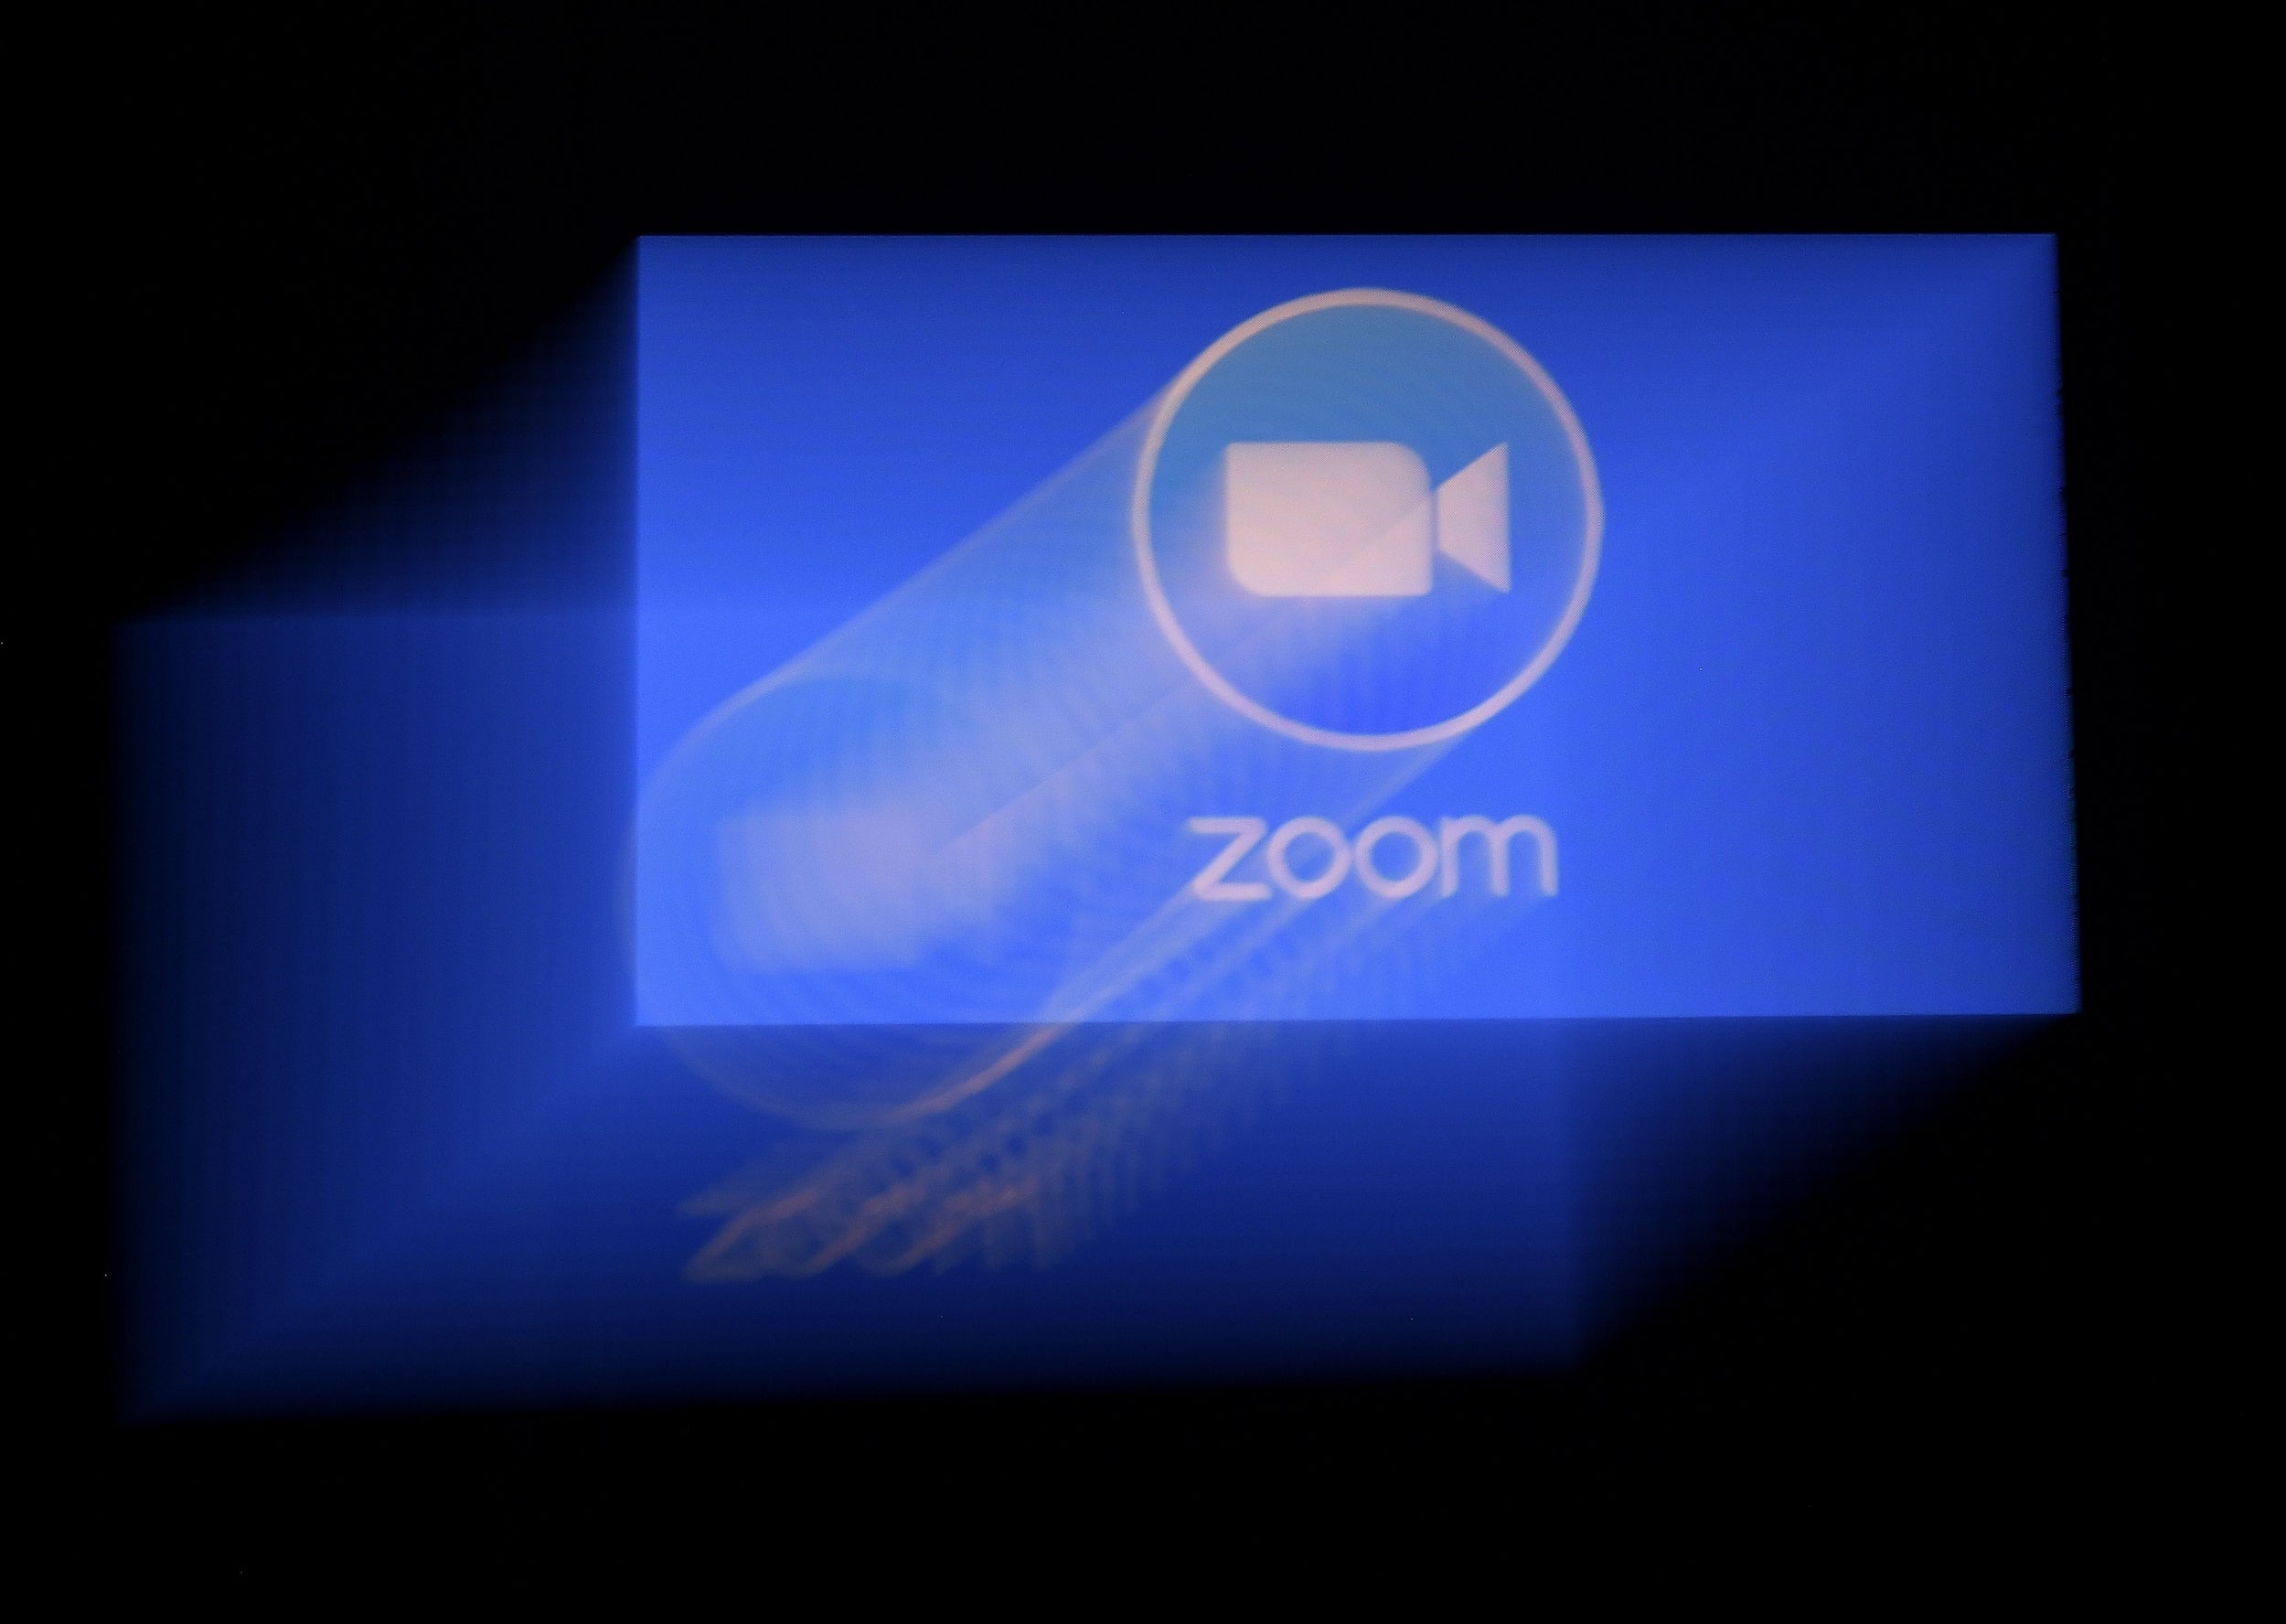 Zoom has jumped from relative obscurity to household name in a few months